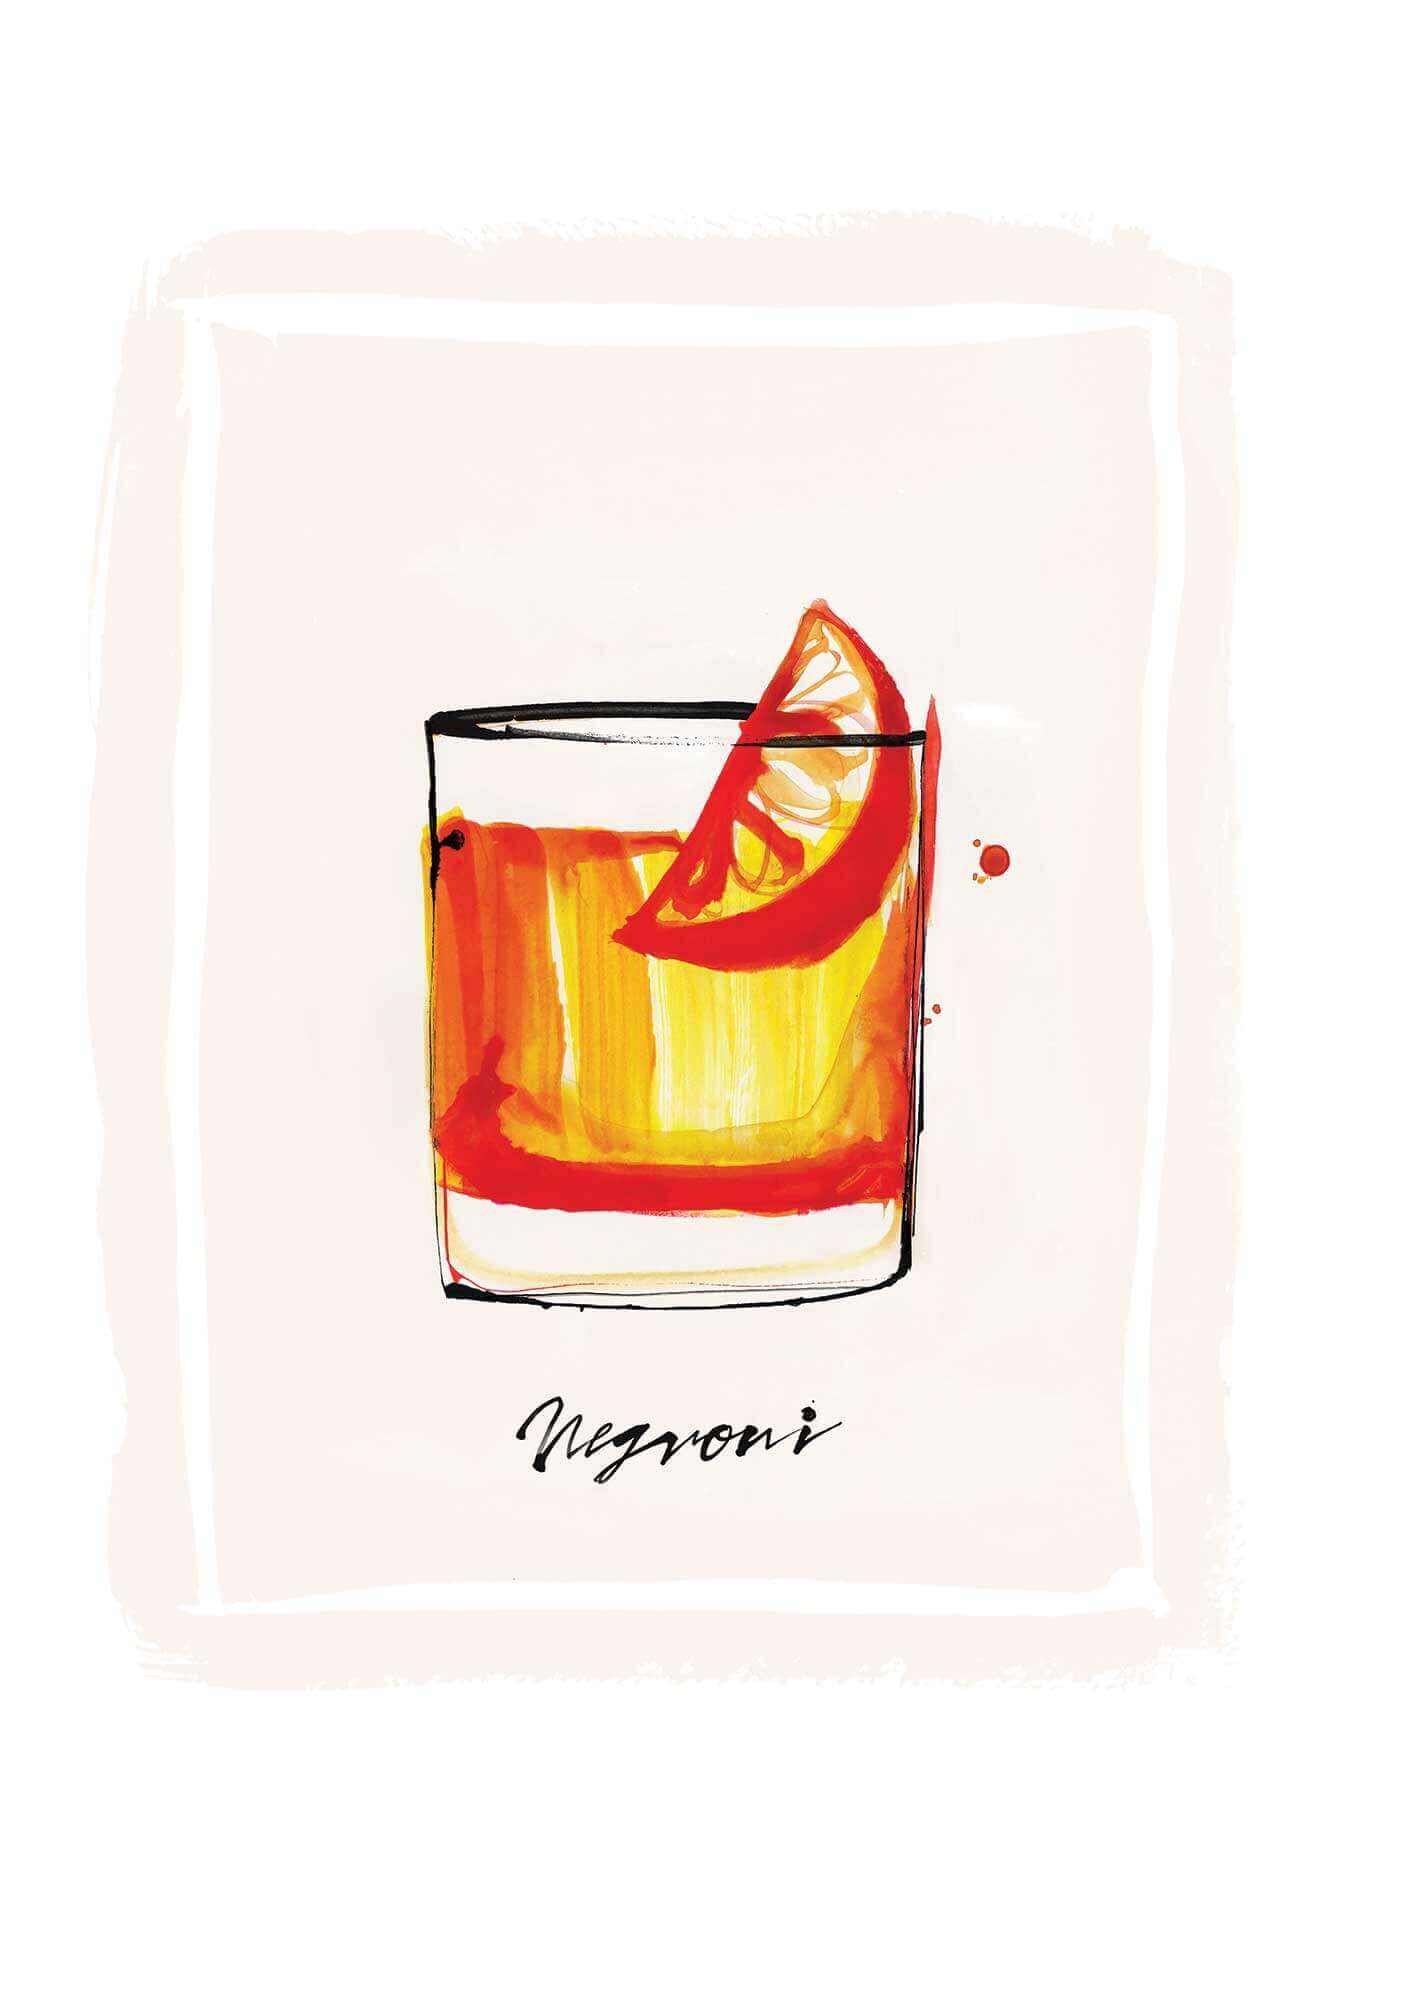 Food & Drink – House of Negroni Collaboration